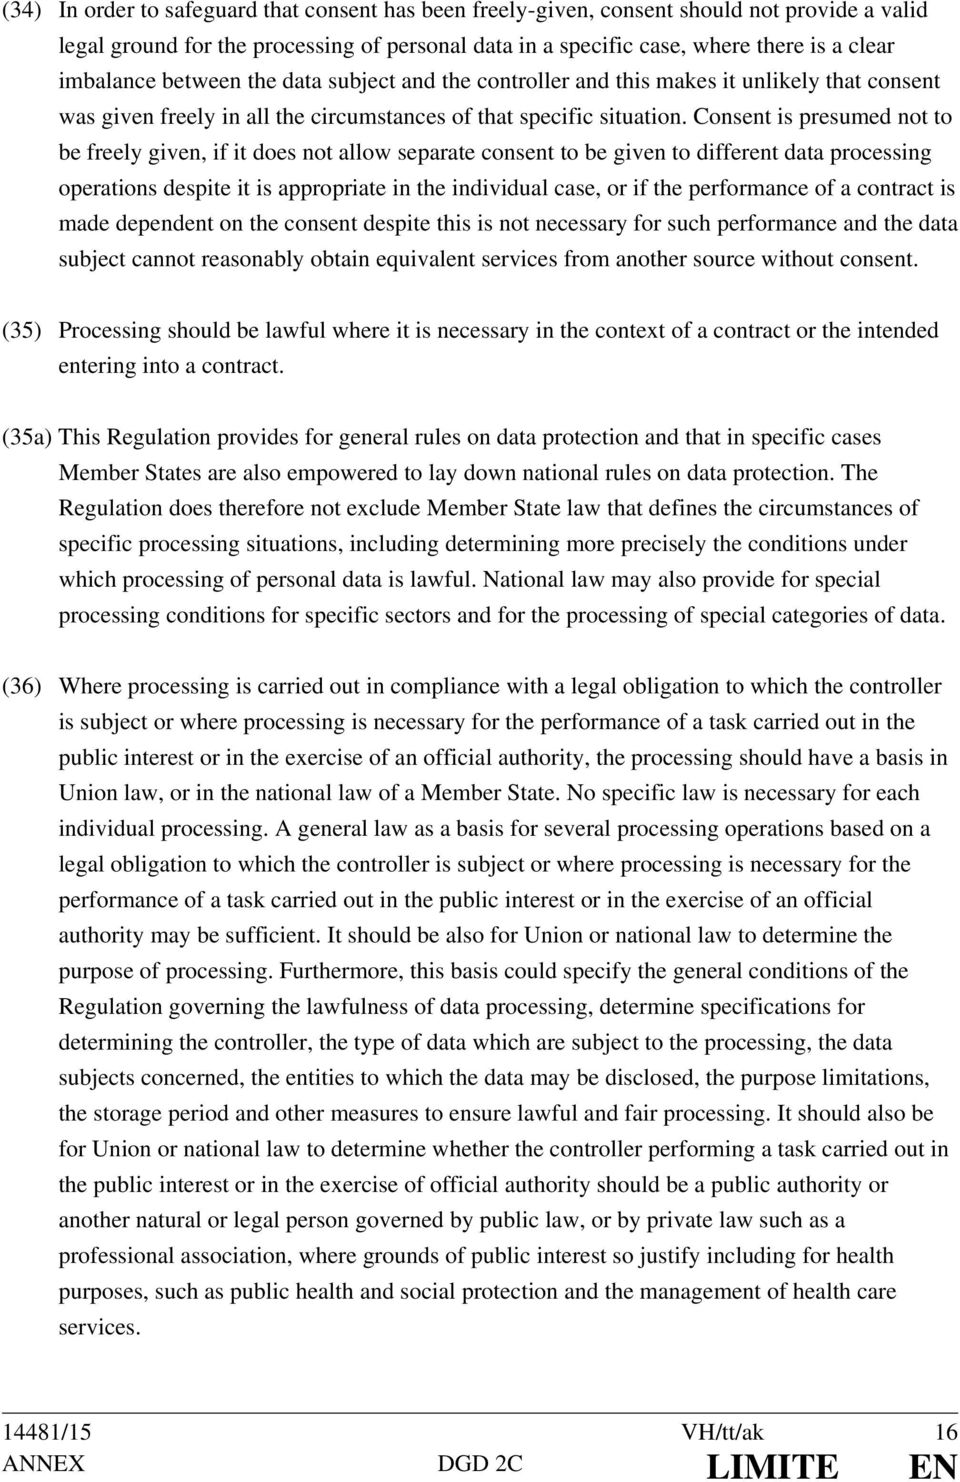 Consent is presumed not to be freely given, if it does not allow separate consent to be given to different data processing operations despite it is appropriate in the individual case, or if the